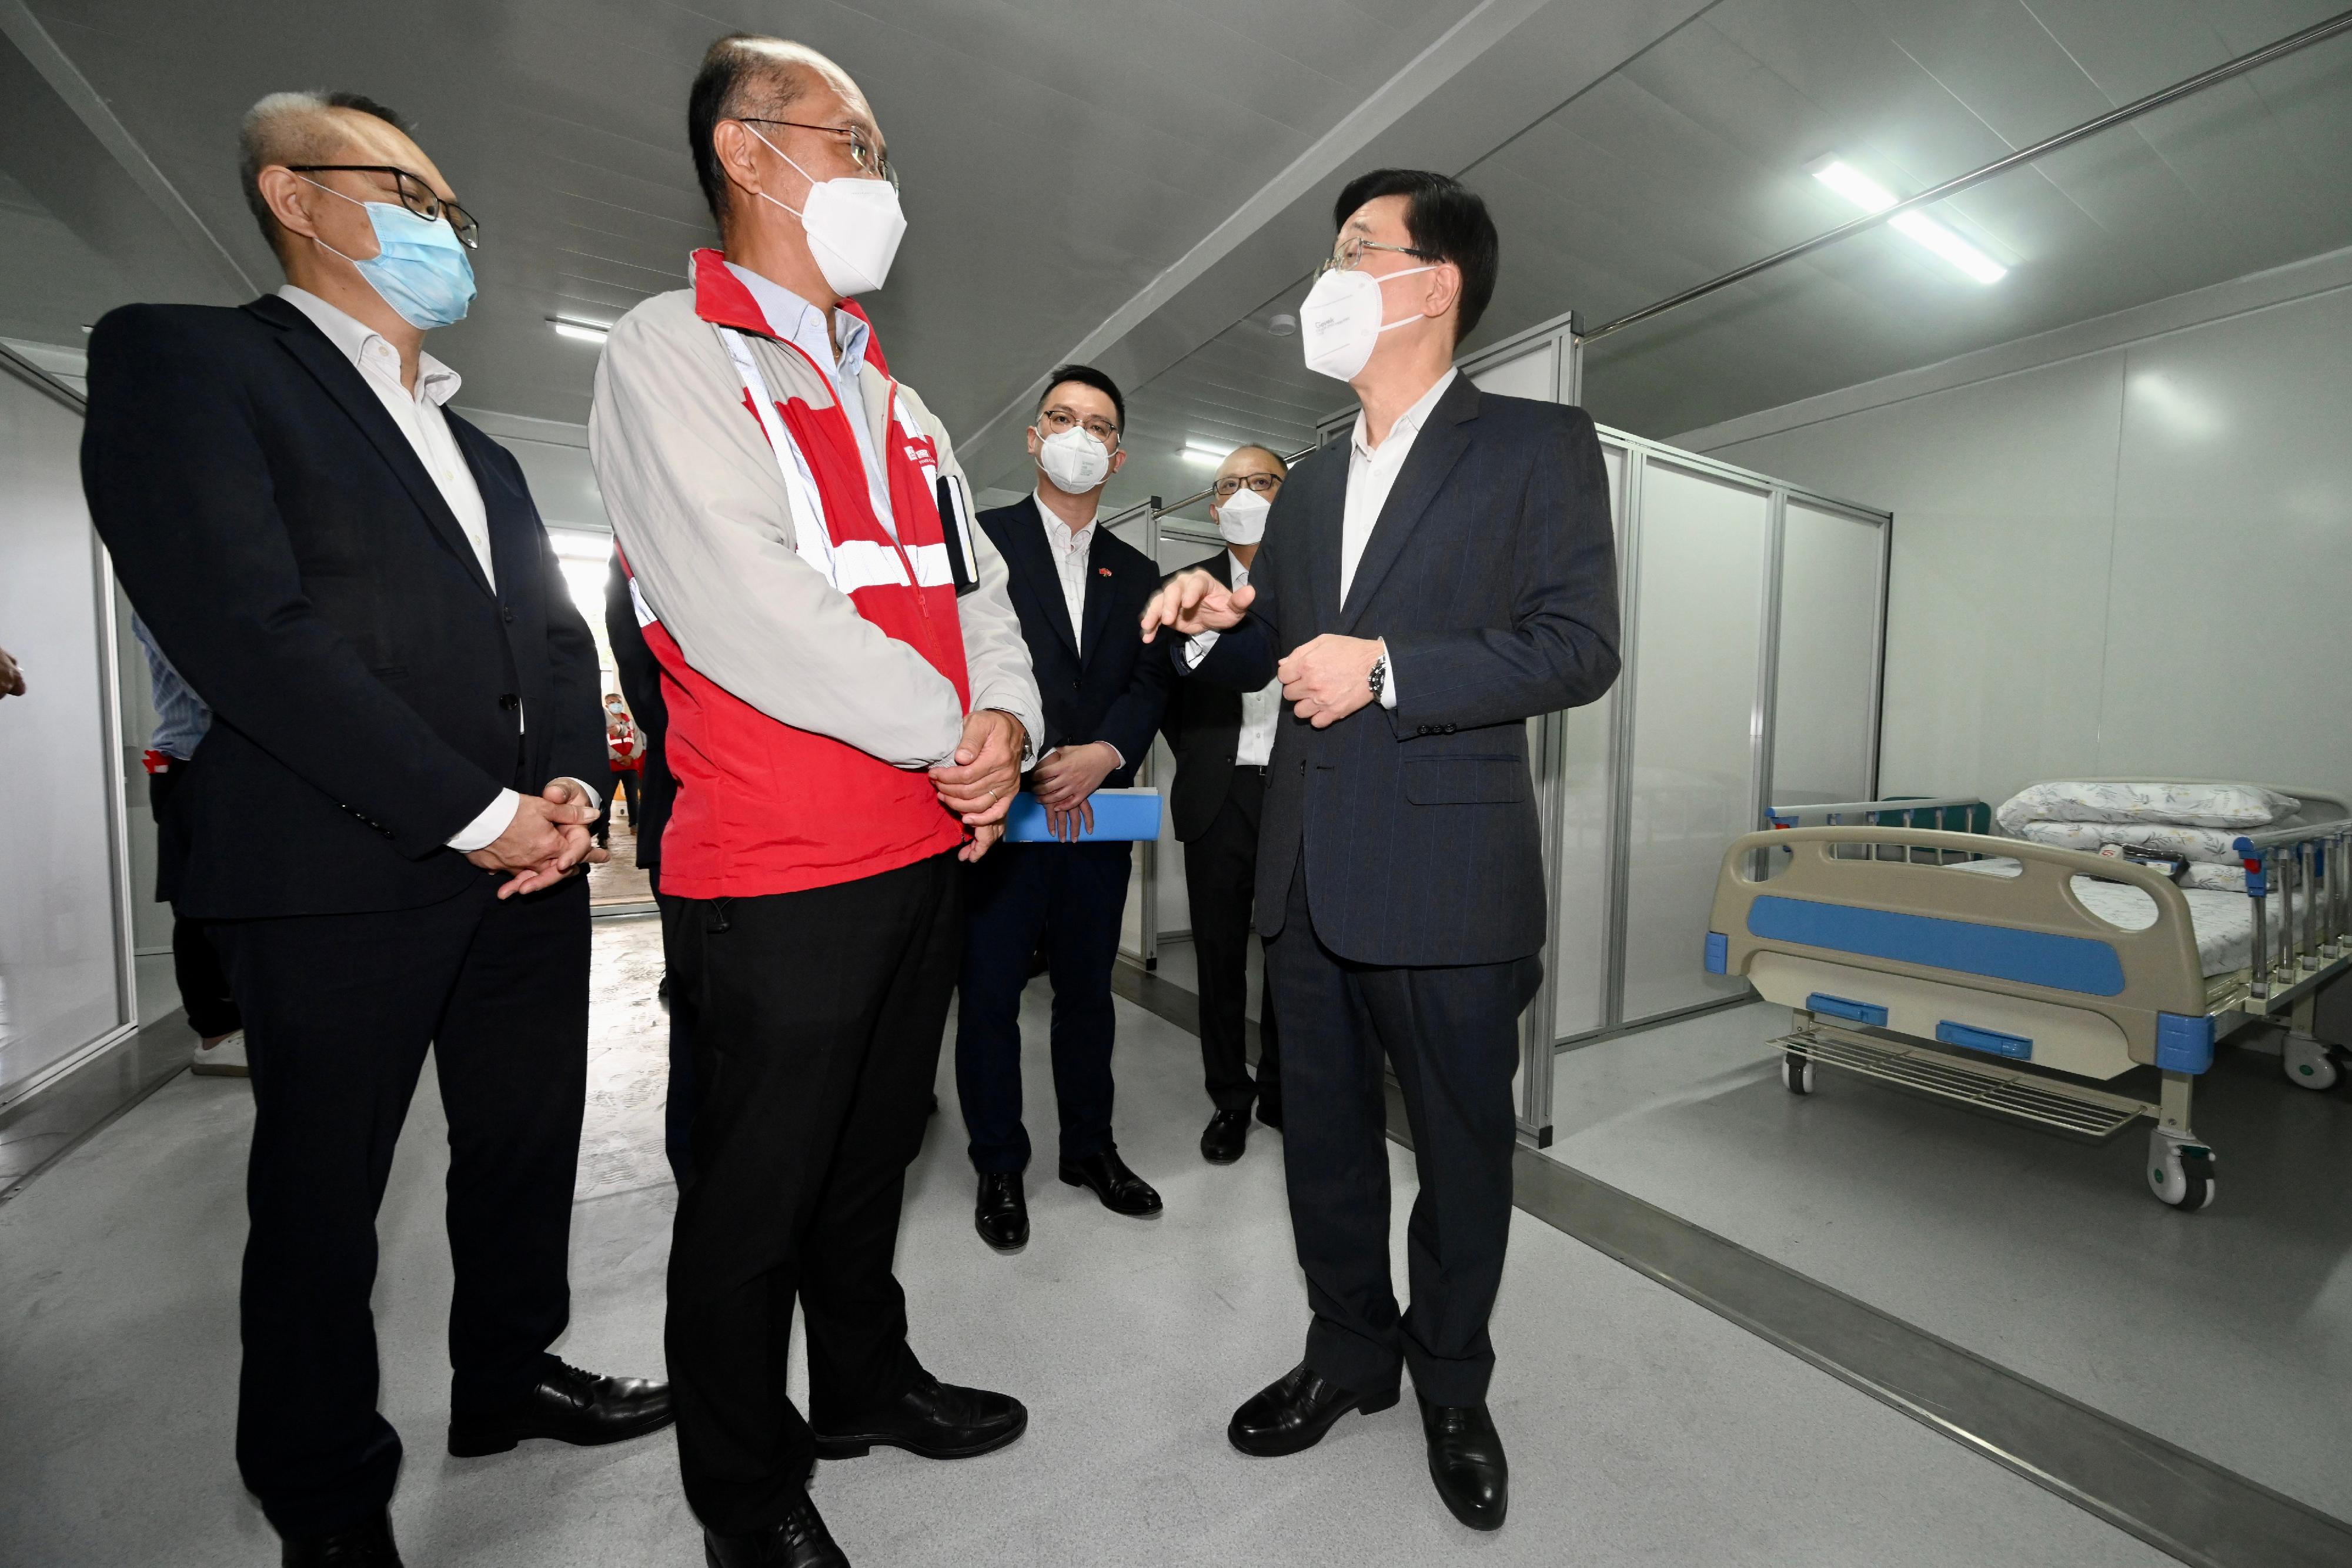 The Chief Secretary for Administration, Mr John Lee, this morning (March 17) visited the fifth community isolation facility constructed with Mainland support near Kai Pak Ling Road at Hung Shui Kiu in Yuen Long. Photo shows Mr Lee (first right), accompanied by a representative of the contractor, touring the newly constructed facilities of the elderly holding centre. Looking on are the Under Secretary for Food and Health, Dr Chui Tak-yi (first left); the Under Secretary for Labour and Welfare, Mr Ho Kai-ming (third left); and the Assistant Director of Social Welfare (Elderly), Mr Tan Tick-yee (second right).